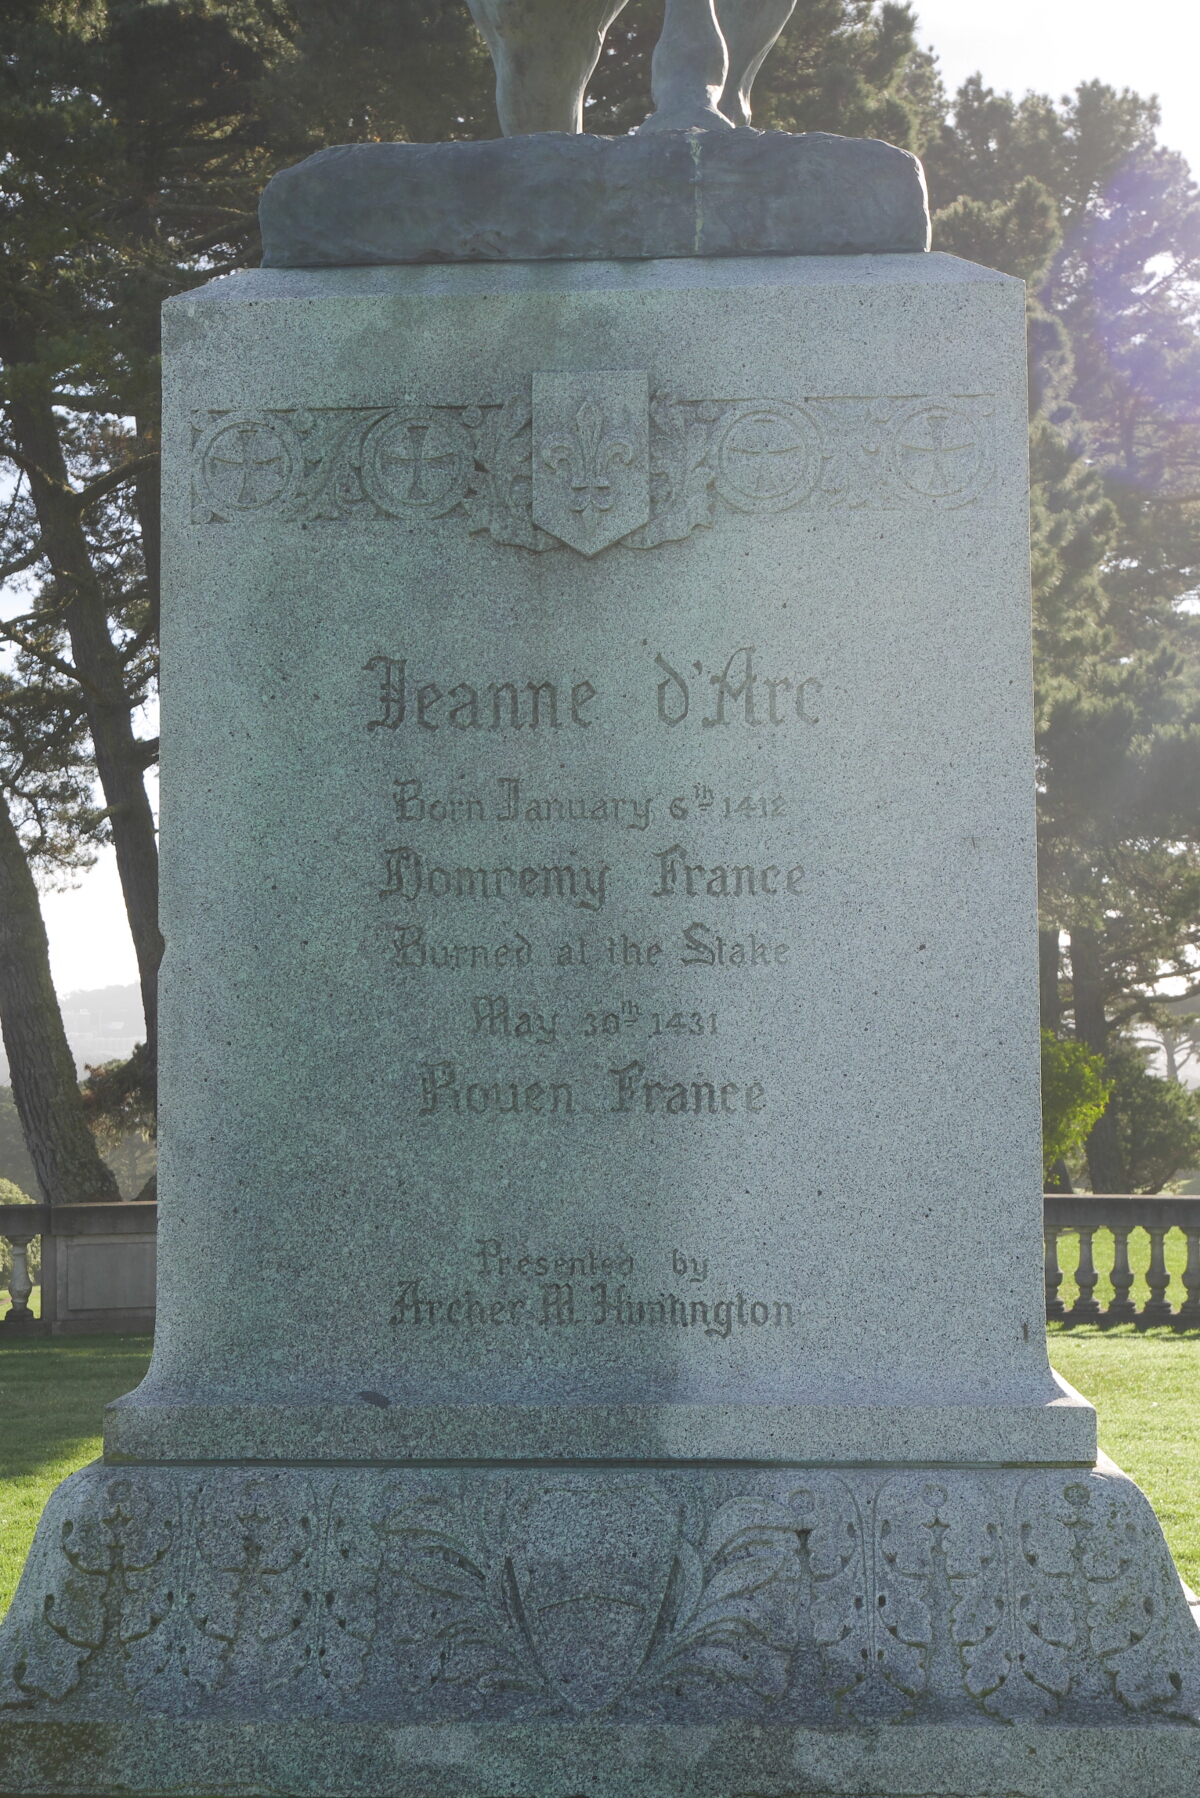 Pedestal of the Joan of Arc statue.